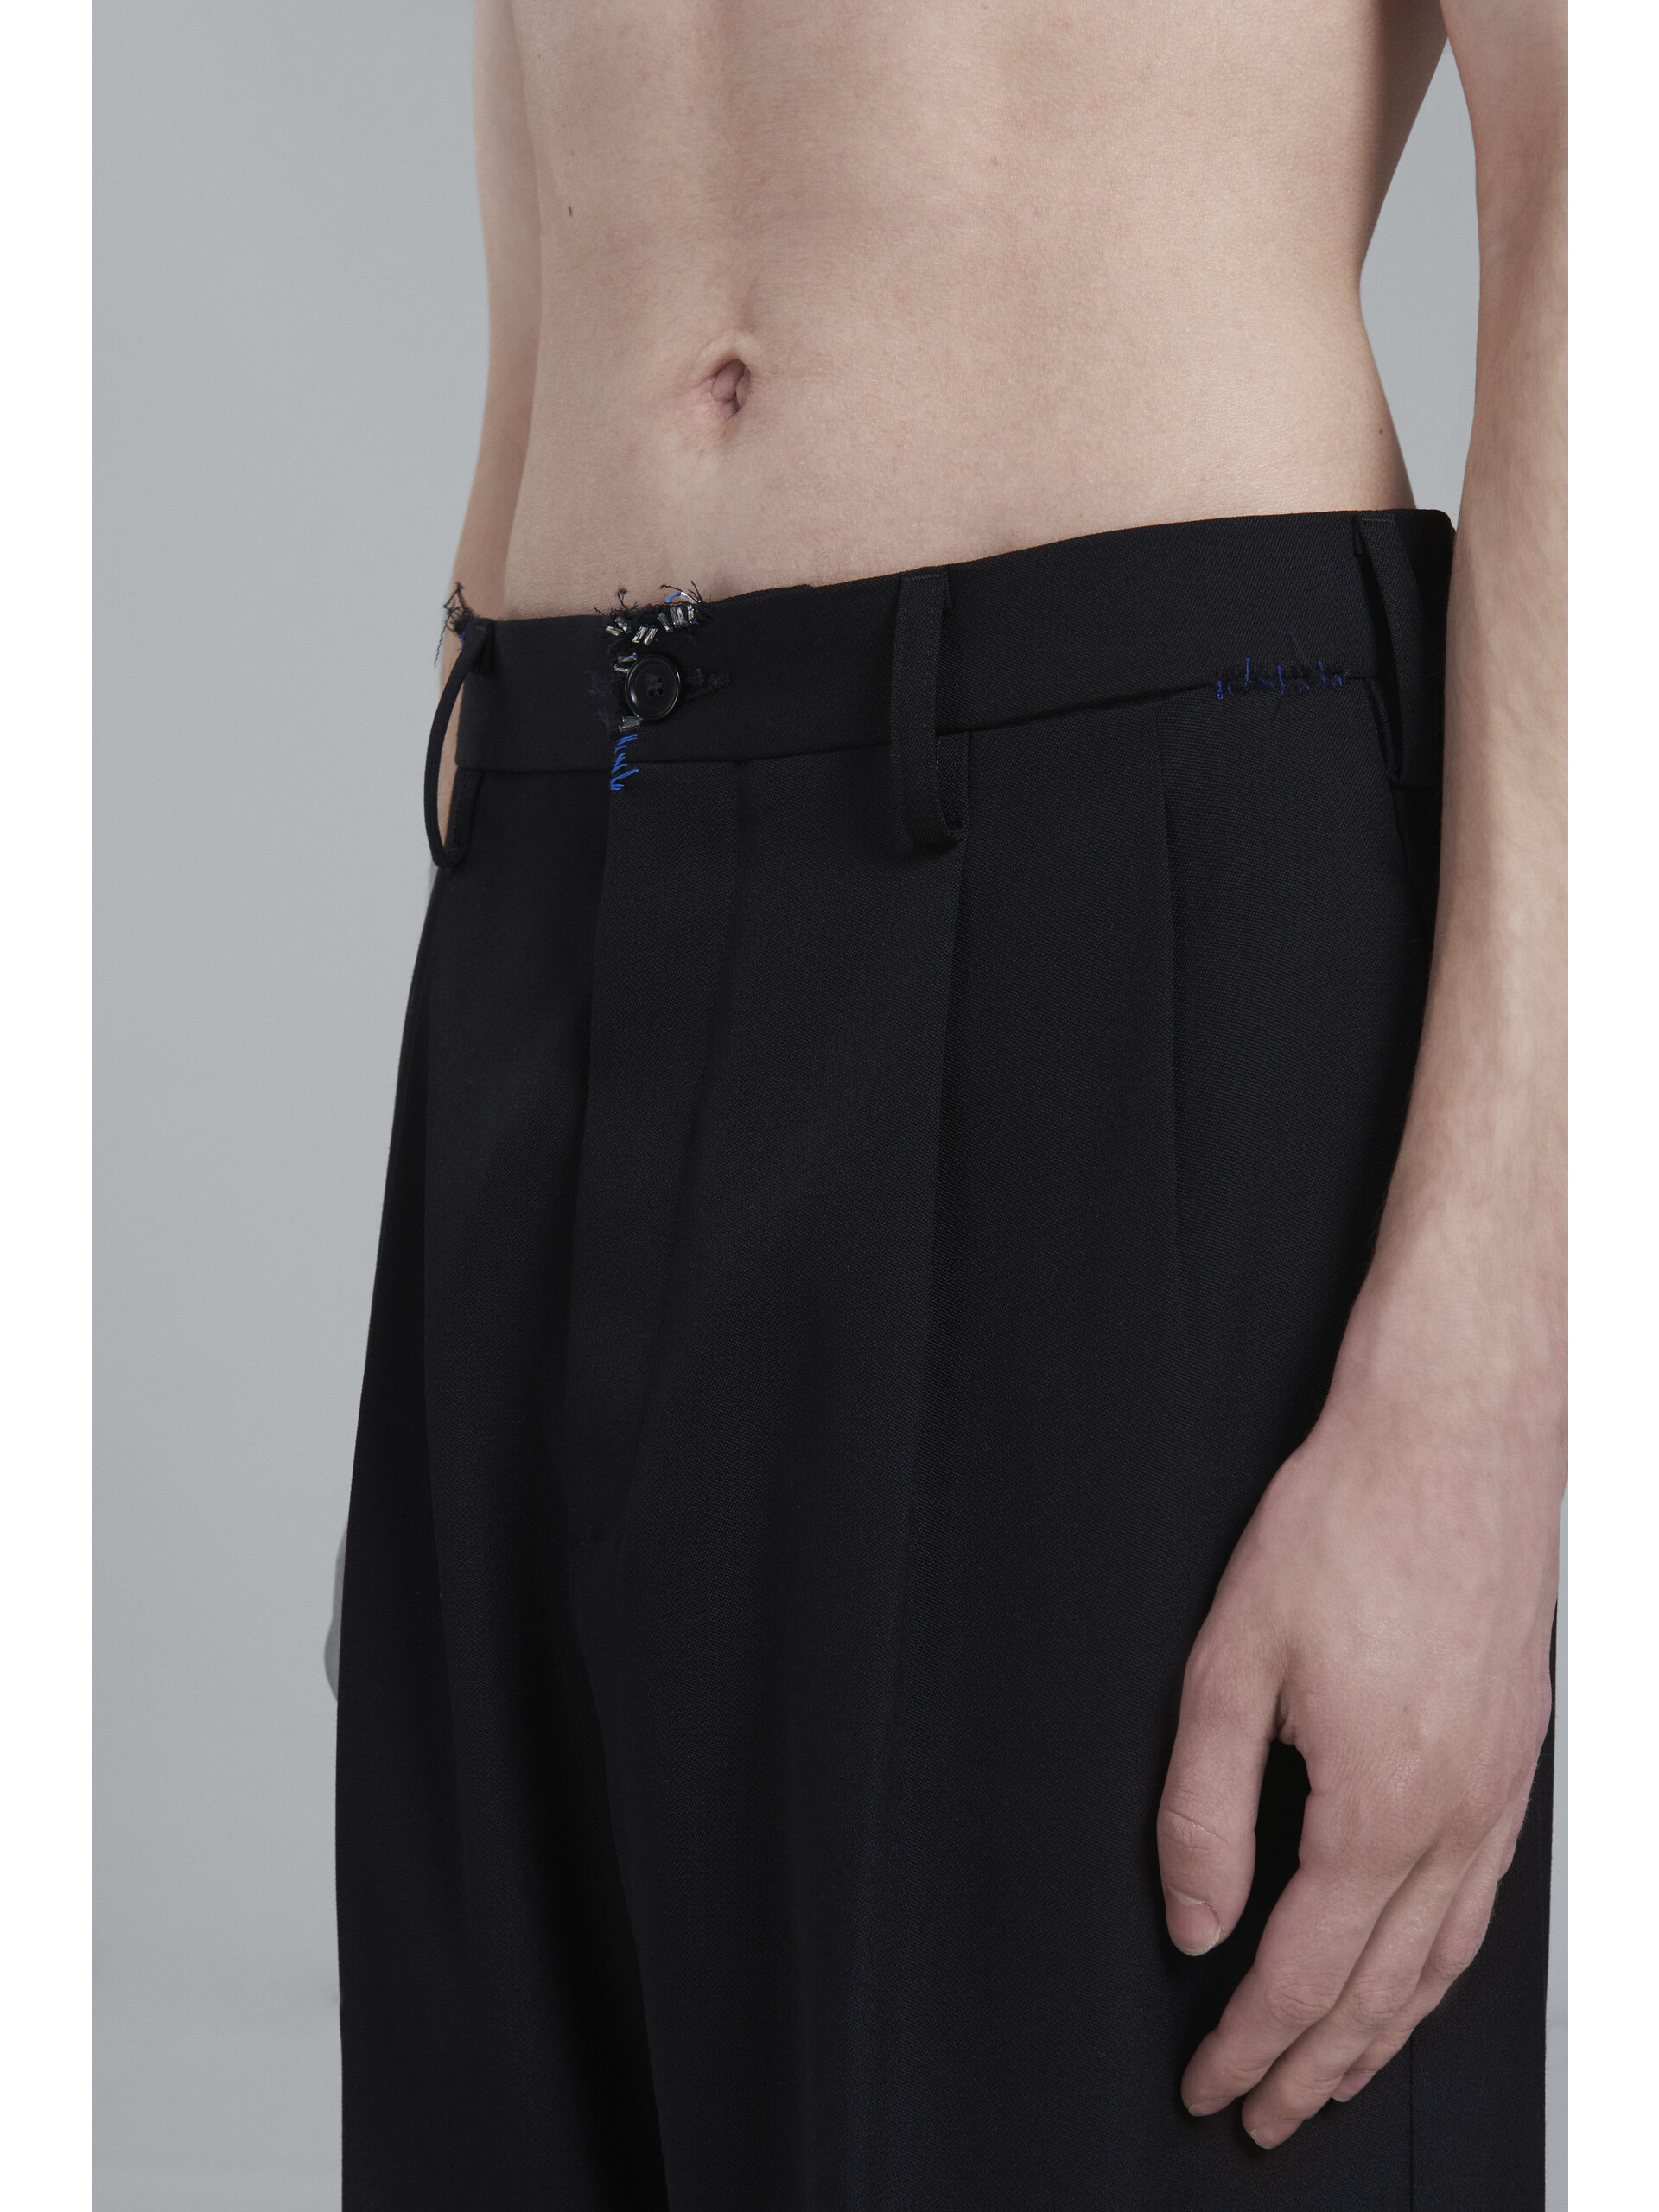 Black tuxedo-style pants with embroidery - Pants - Image 4